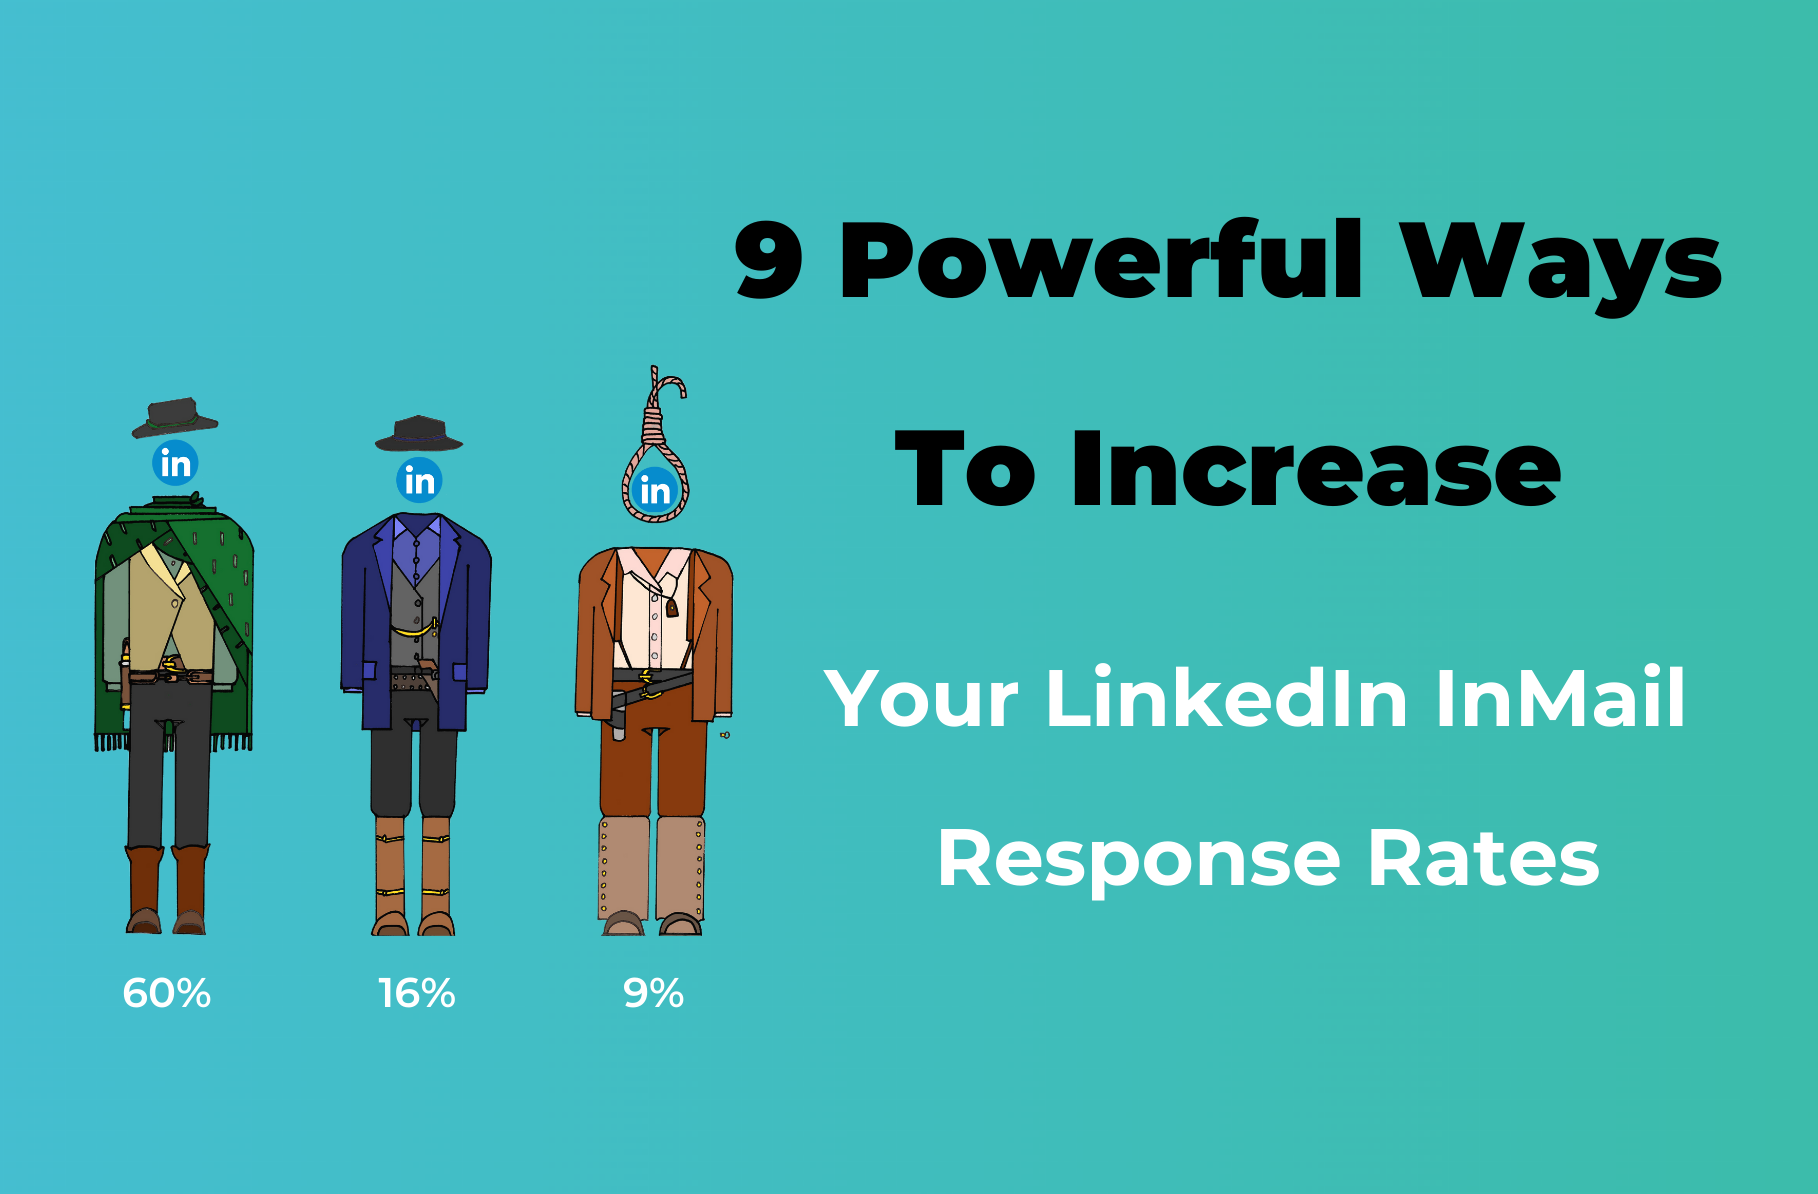 9 Powerful Ways To Increase Your LinkedIn InMail Response Rates